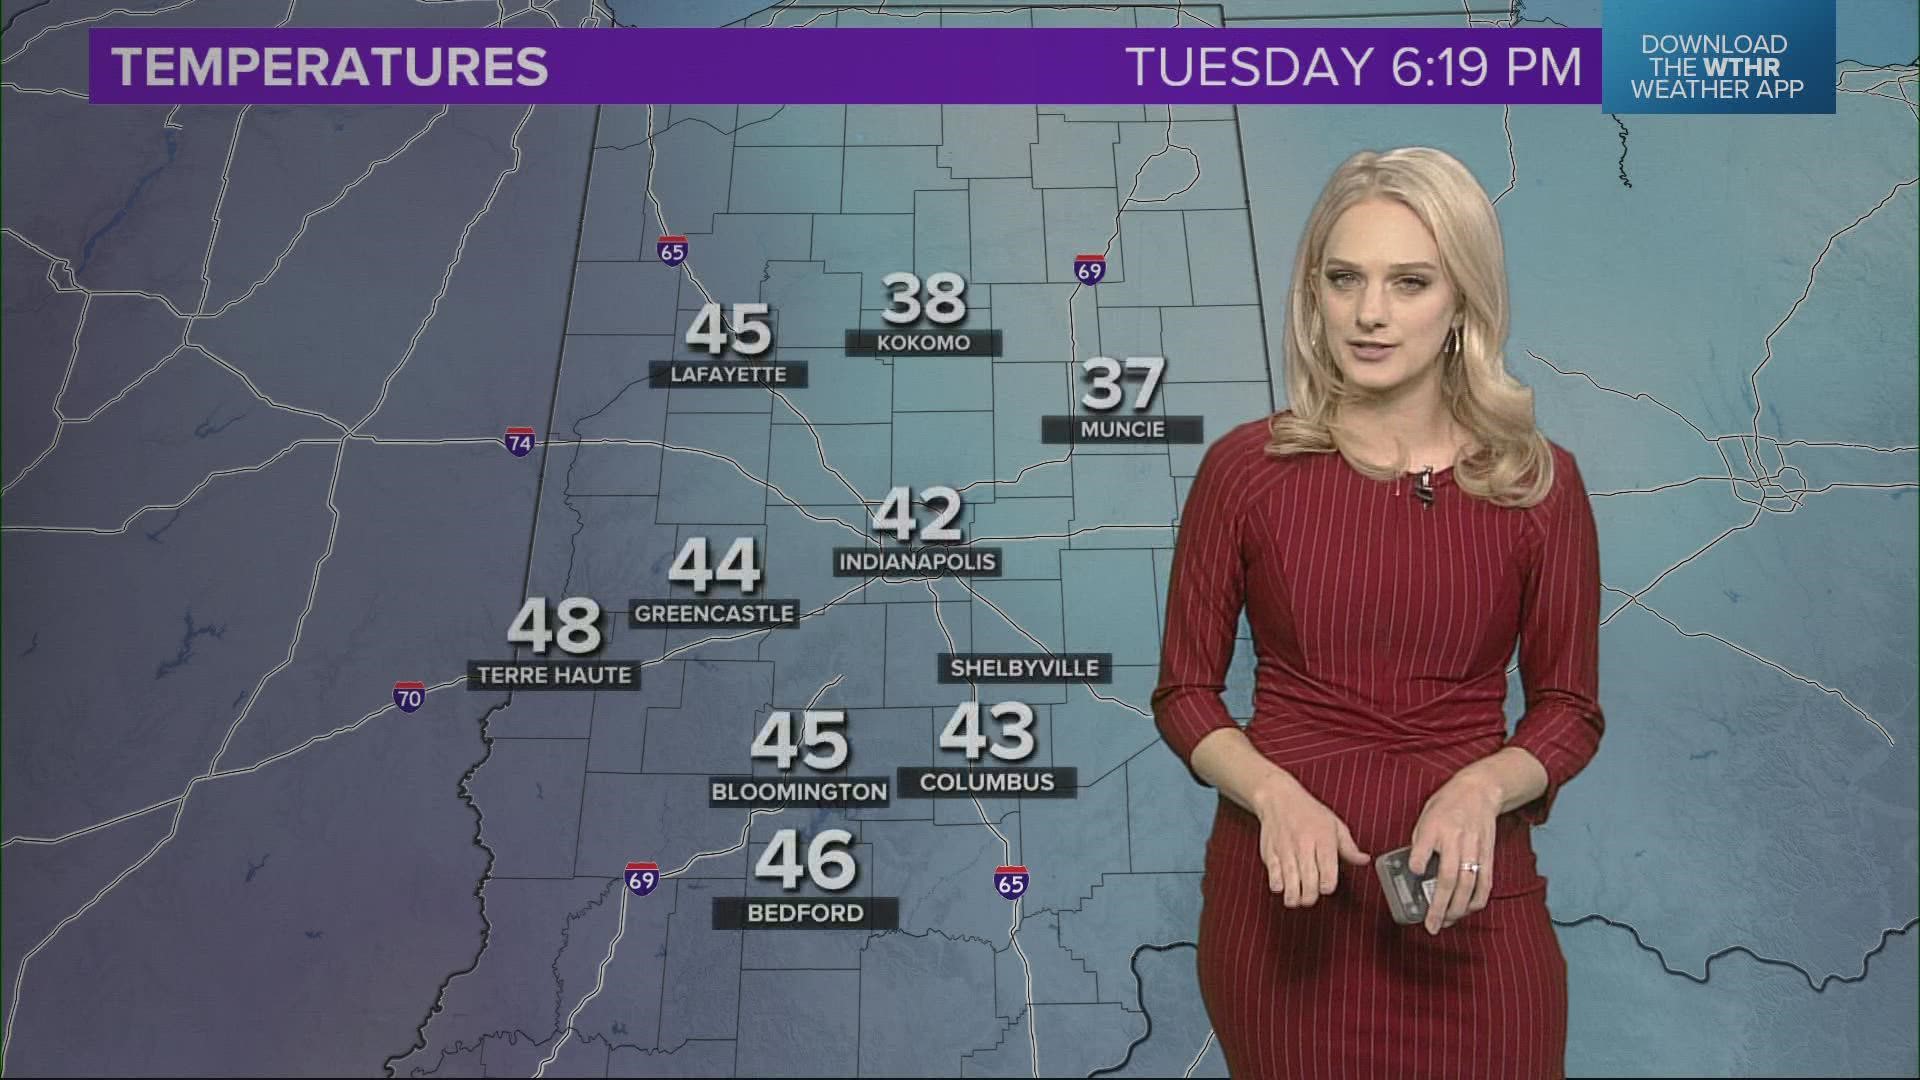 Chelsea Stevens has your latest forecast. Get more updates with the WTHR Weather app.